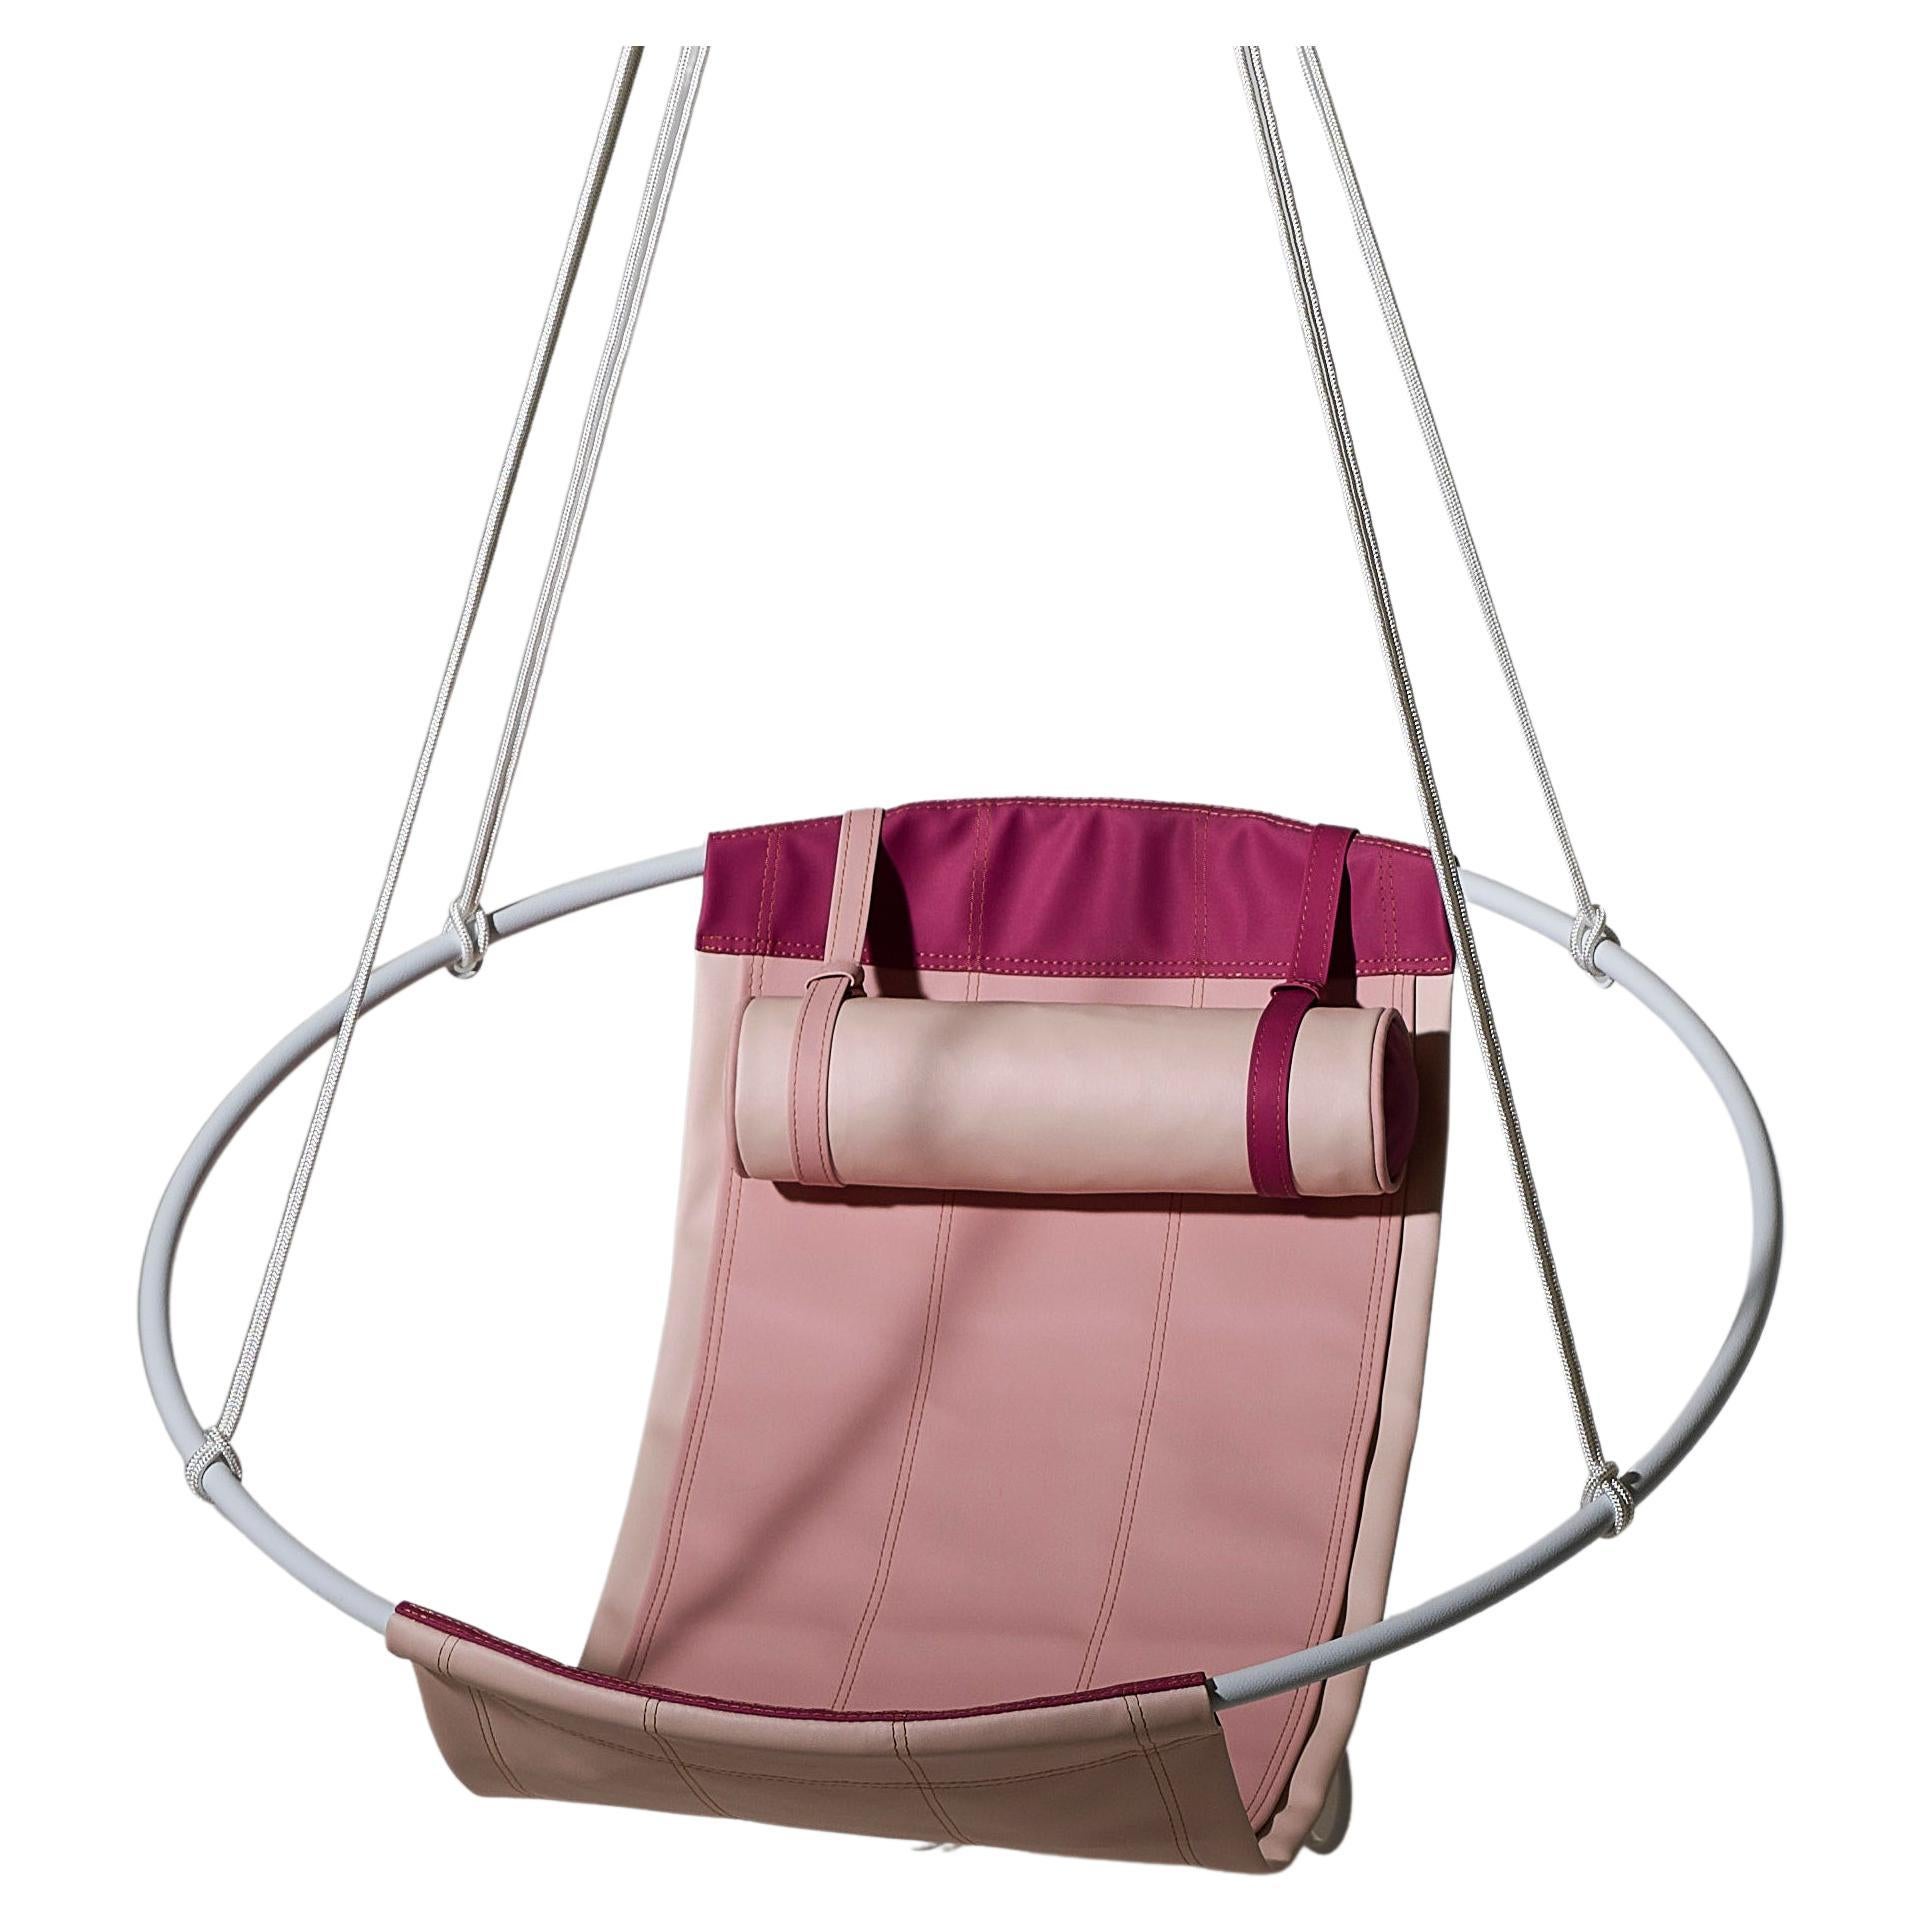 Modern Chic Outdoor Sling Hanging Chair - Pink For Sale